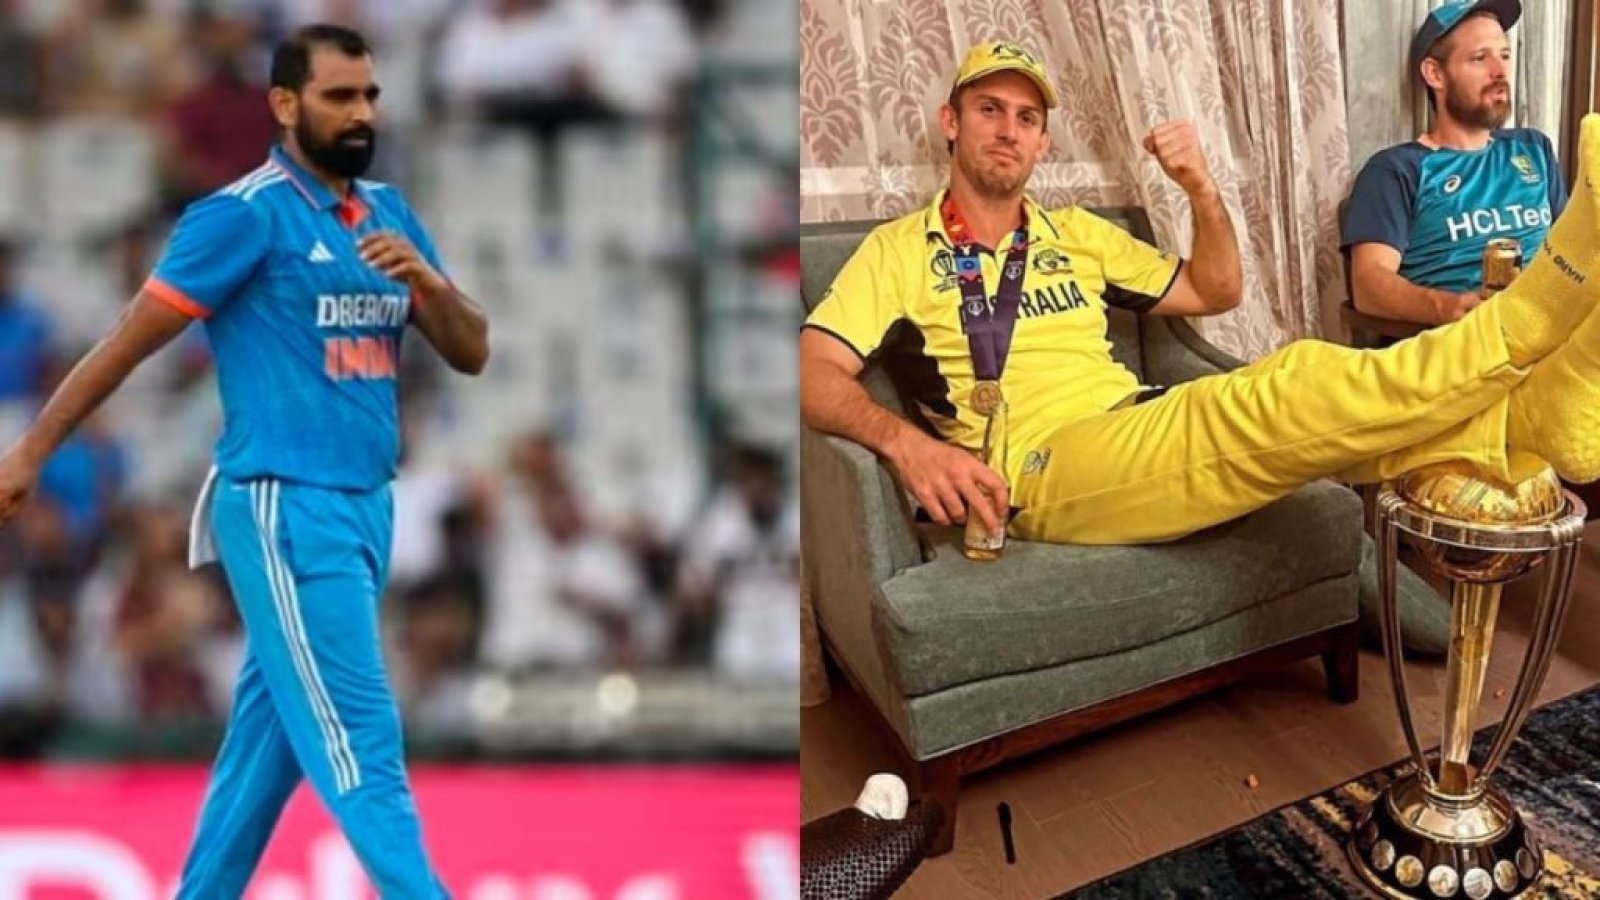 Mohammed Shami got angry after seeing the picture of Mitchell Marsh's feet on the World Cup trophy, said this in anger